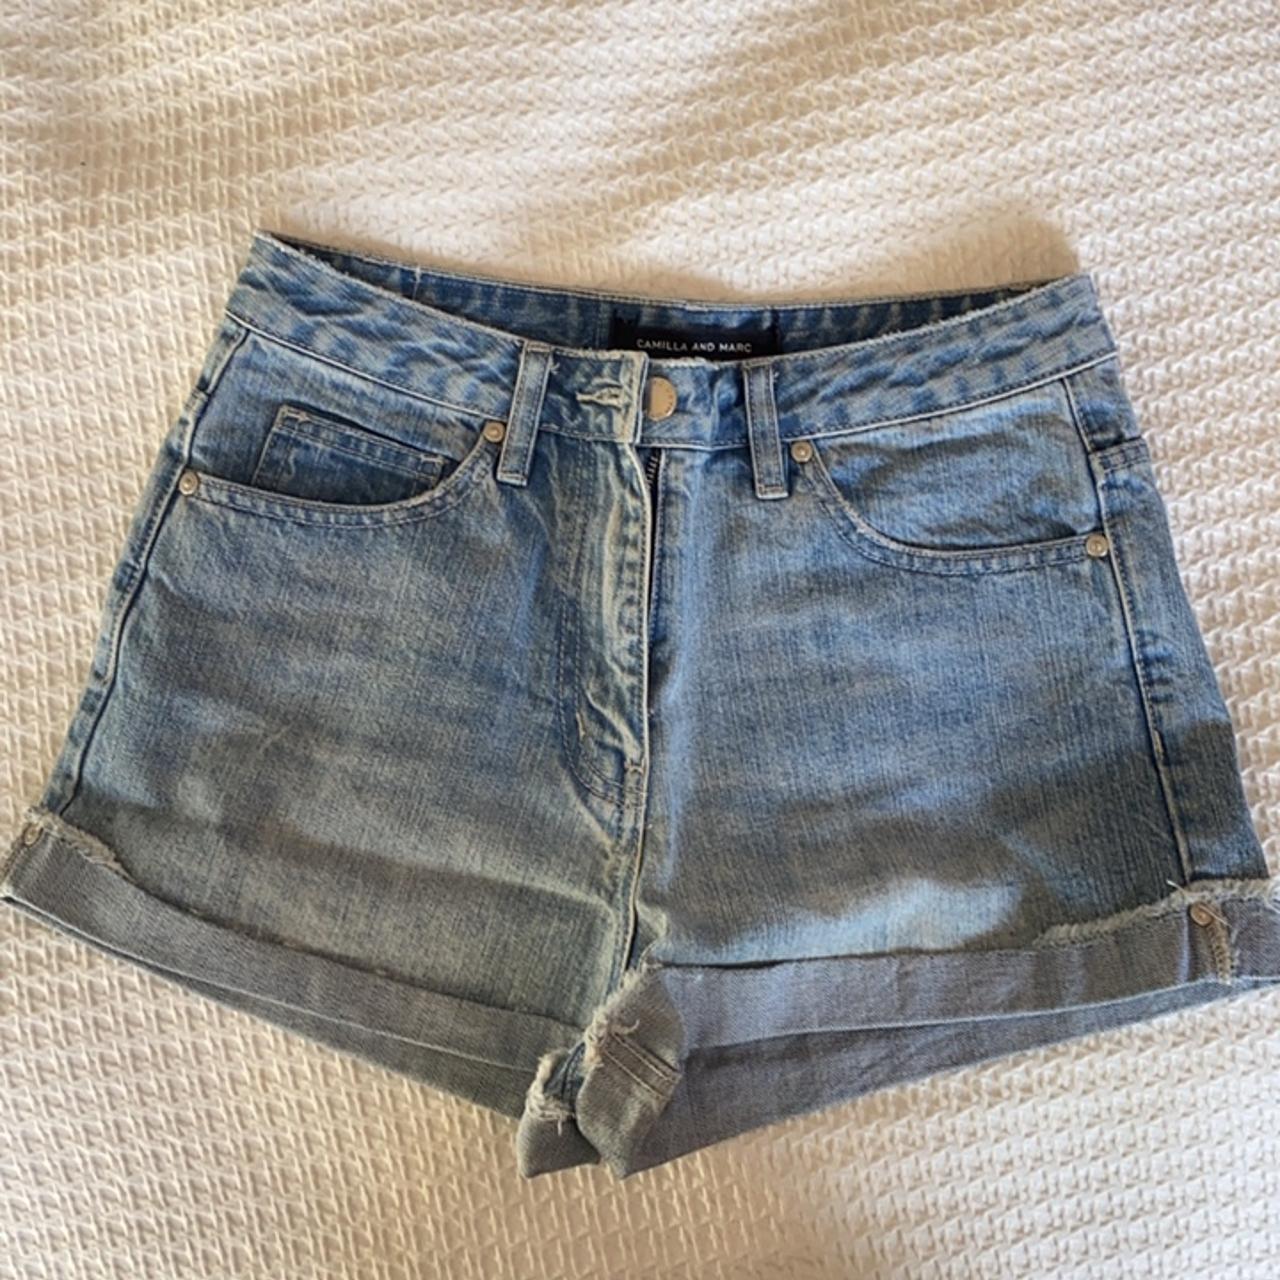 Camilla and Marc denim short Worn once, in perfect... - Depop